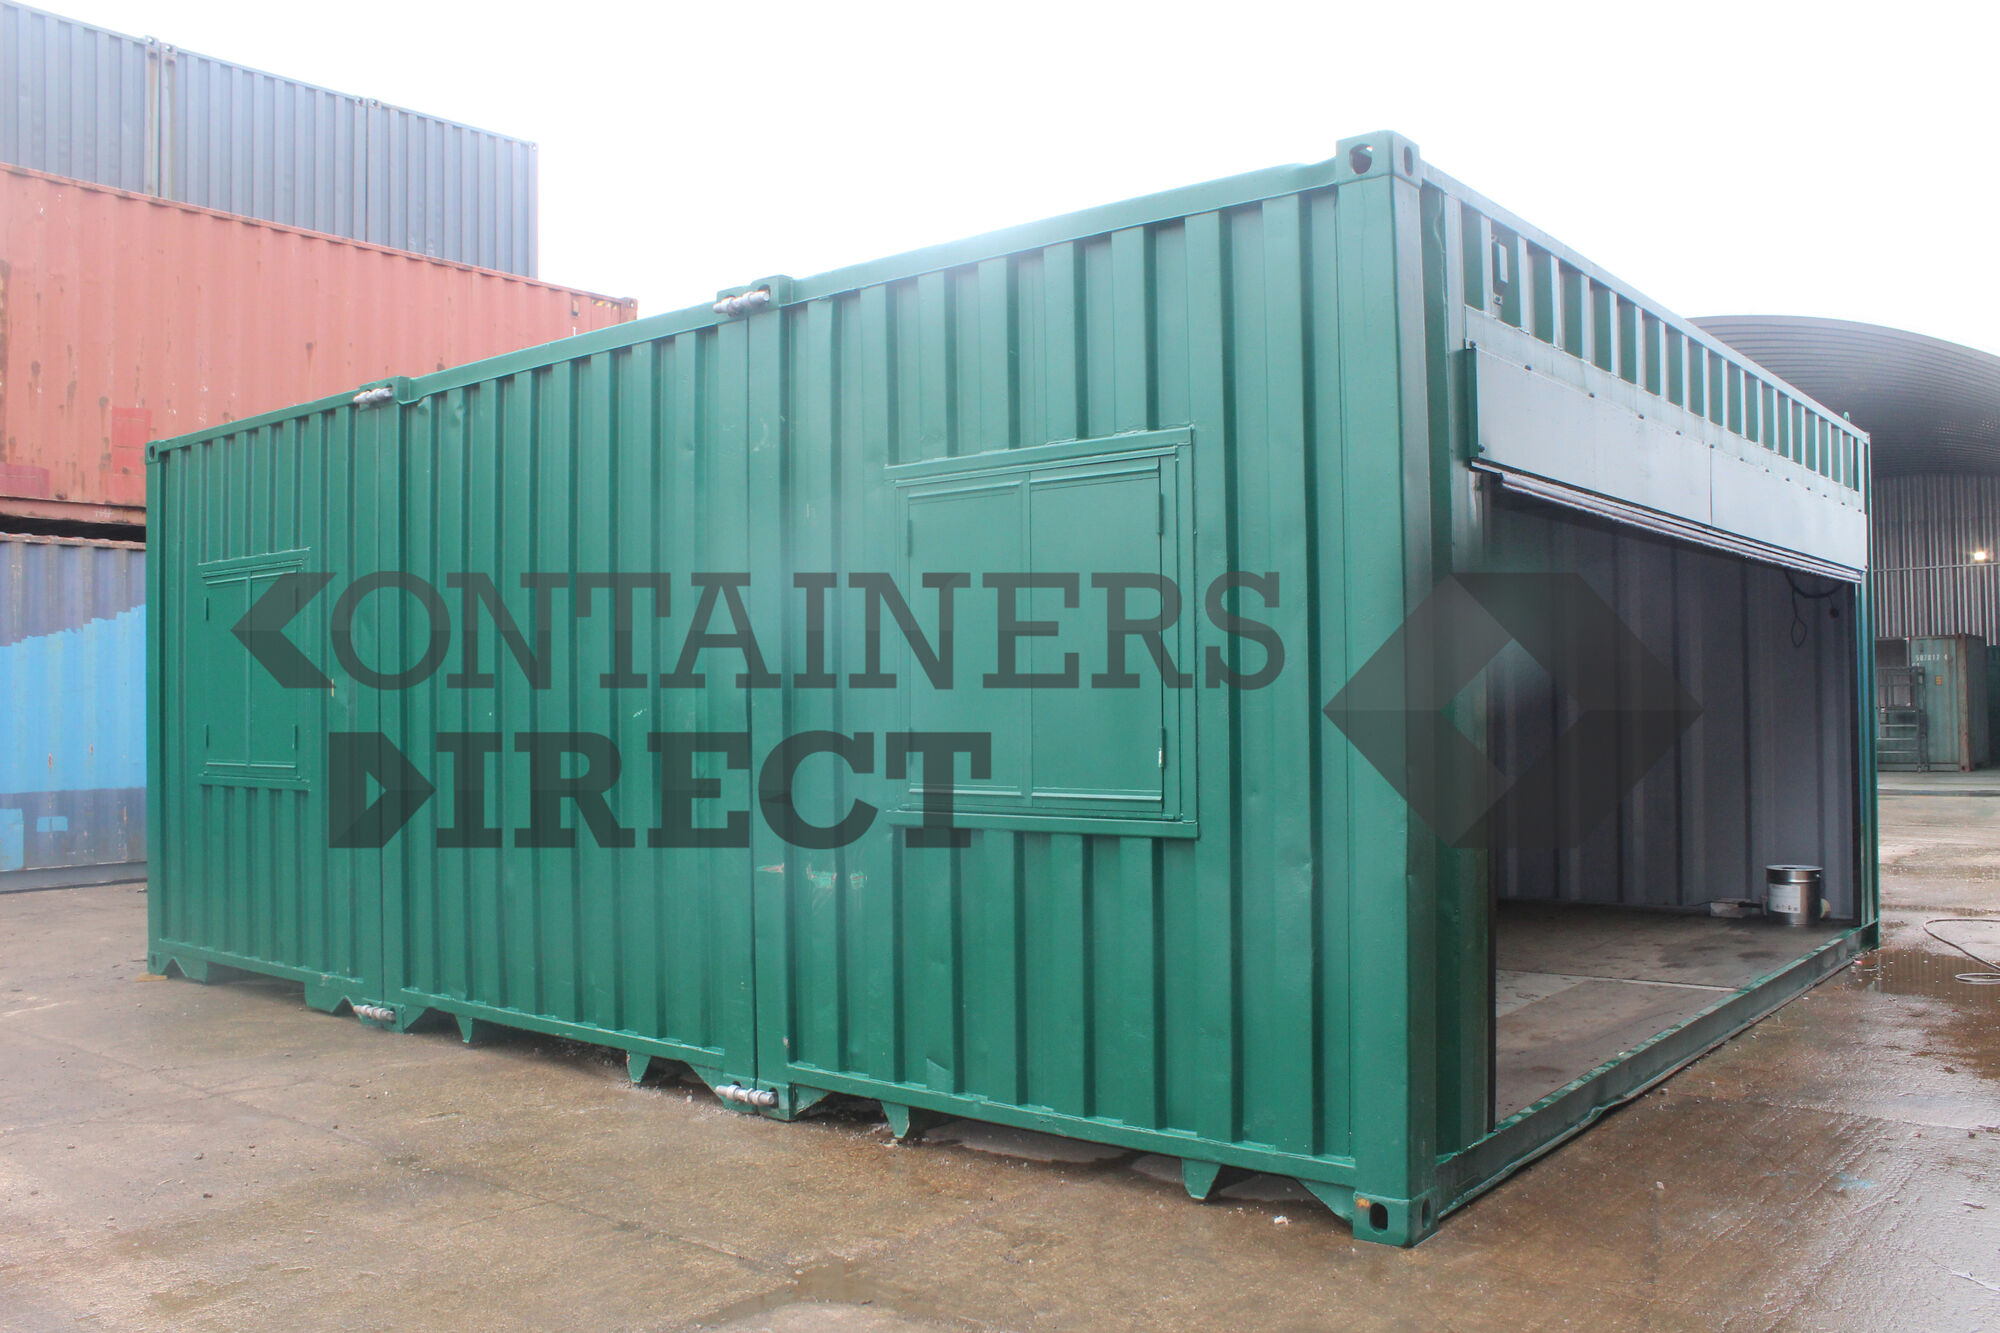 Shipping Container Conversions 24ft x 20ft garage CS74638, Case Studies, Garages